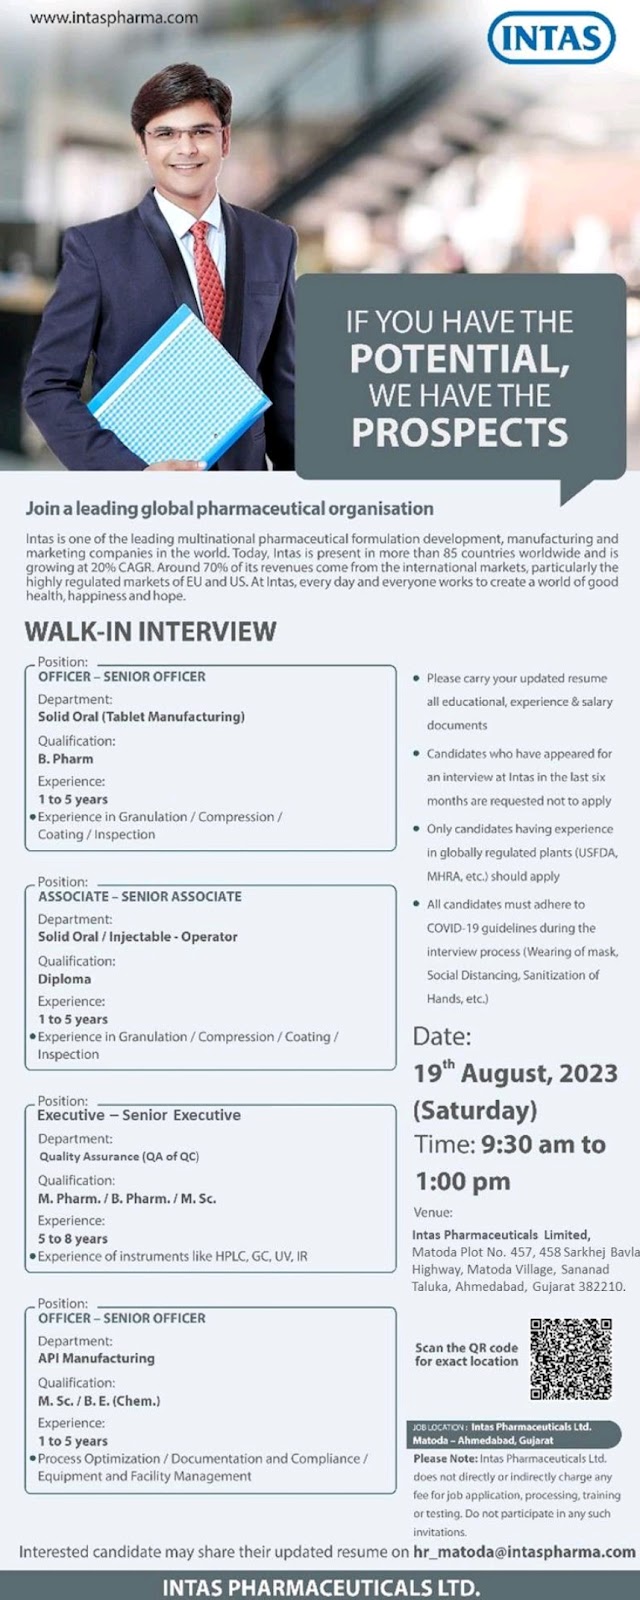 Intas Pharma | Walk-in interview for API & OSD Manufacturing & QA on 19th Aug 2023